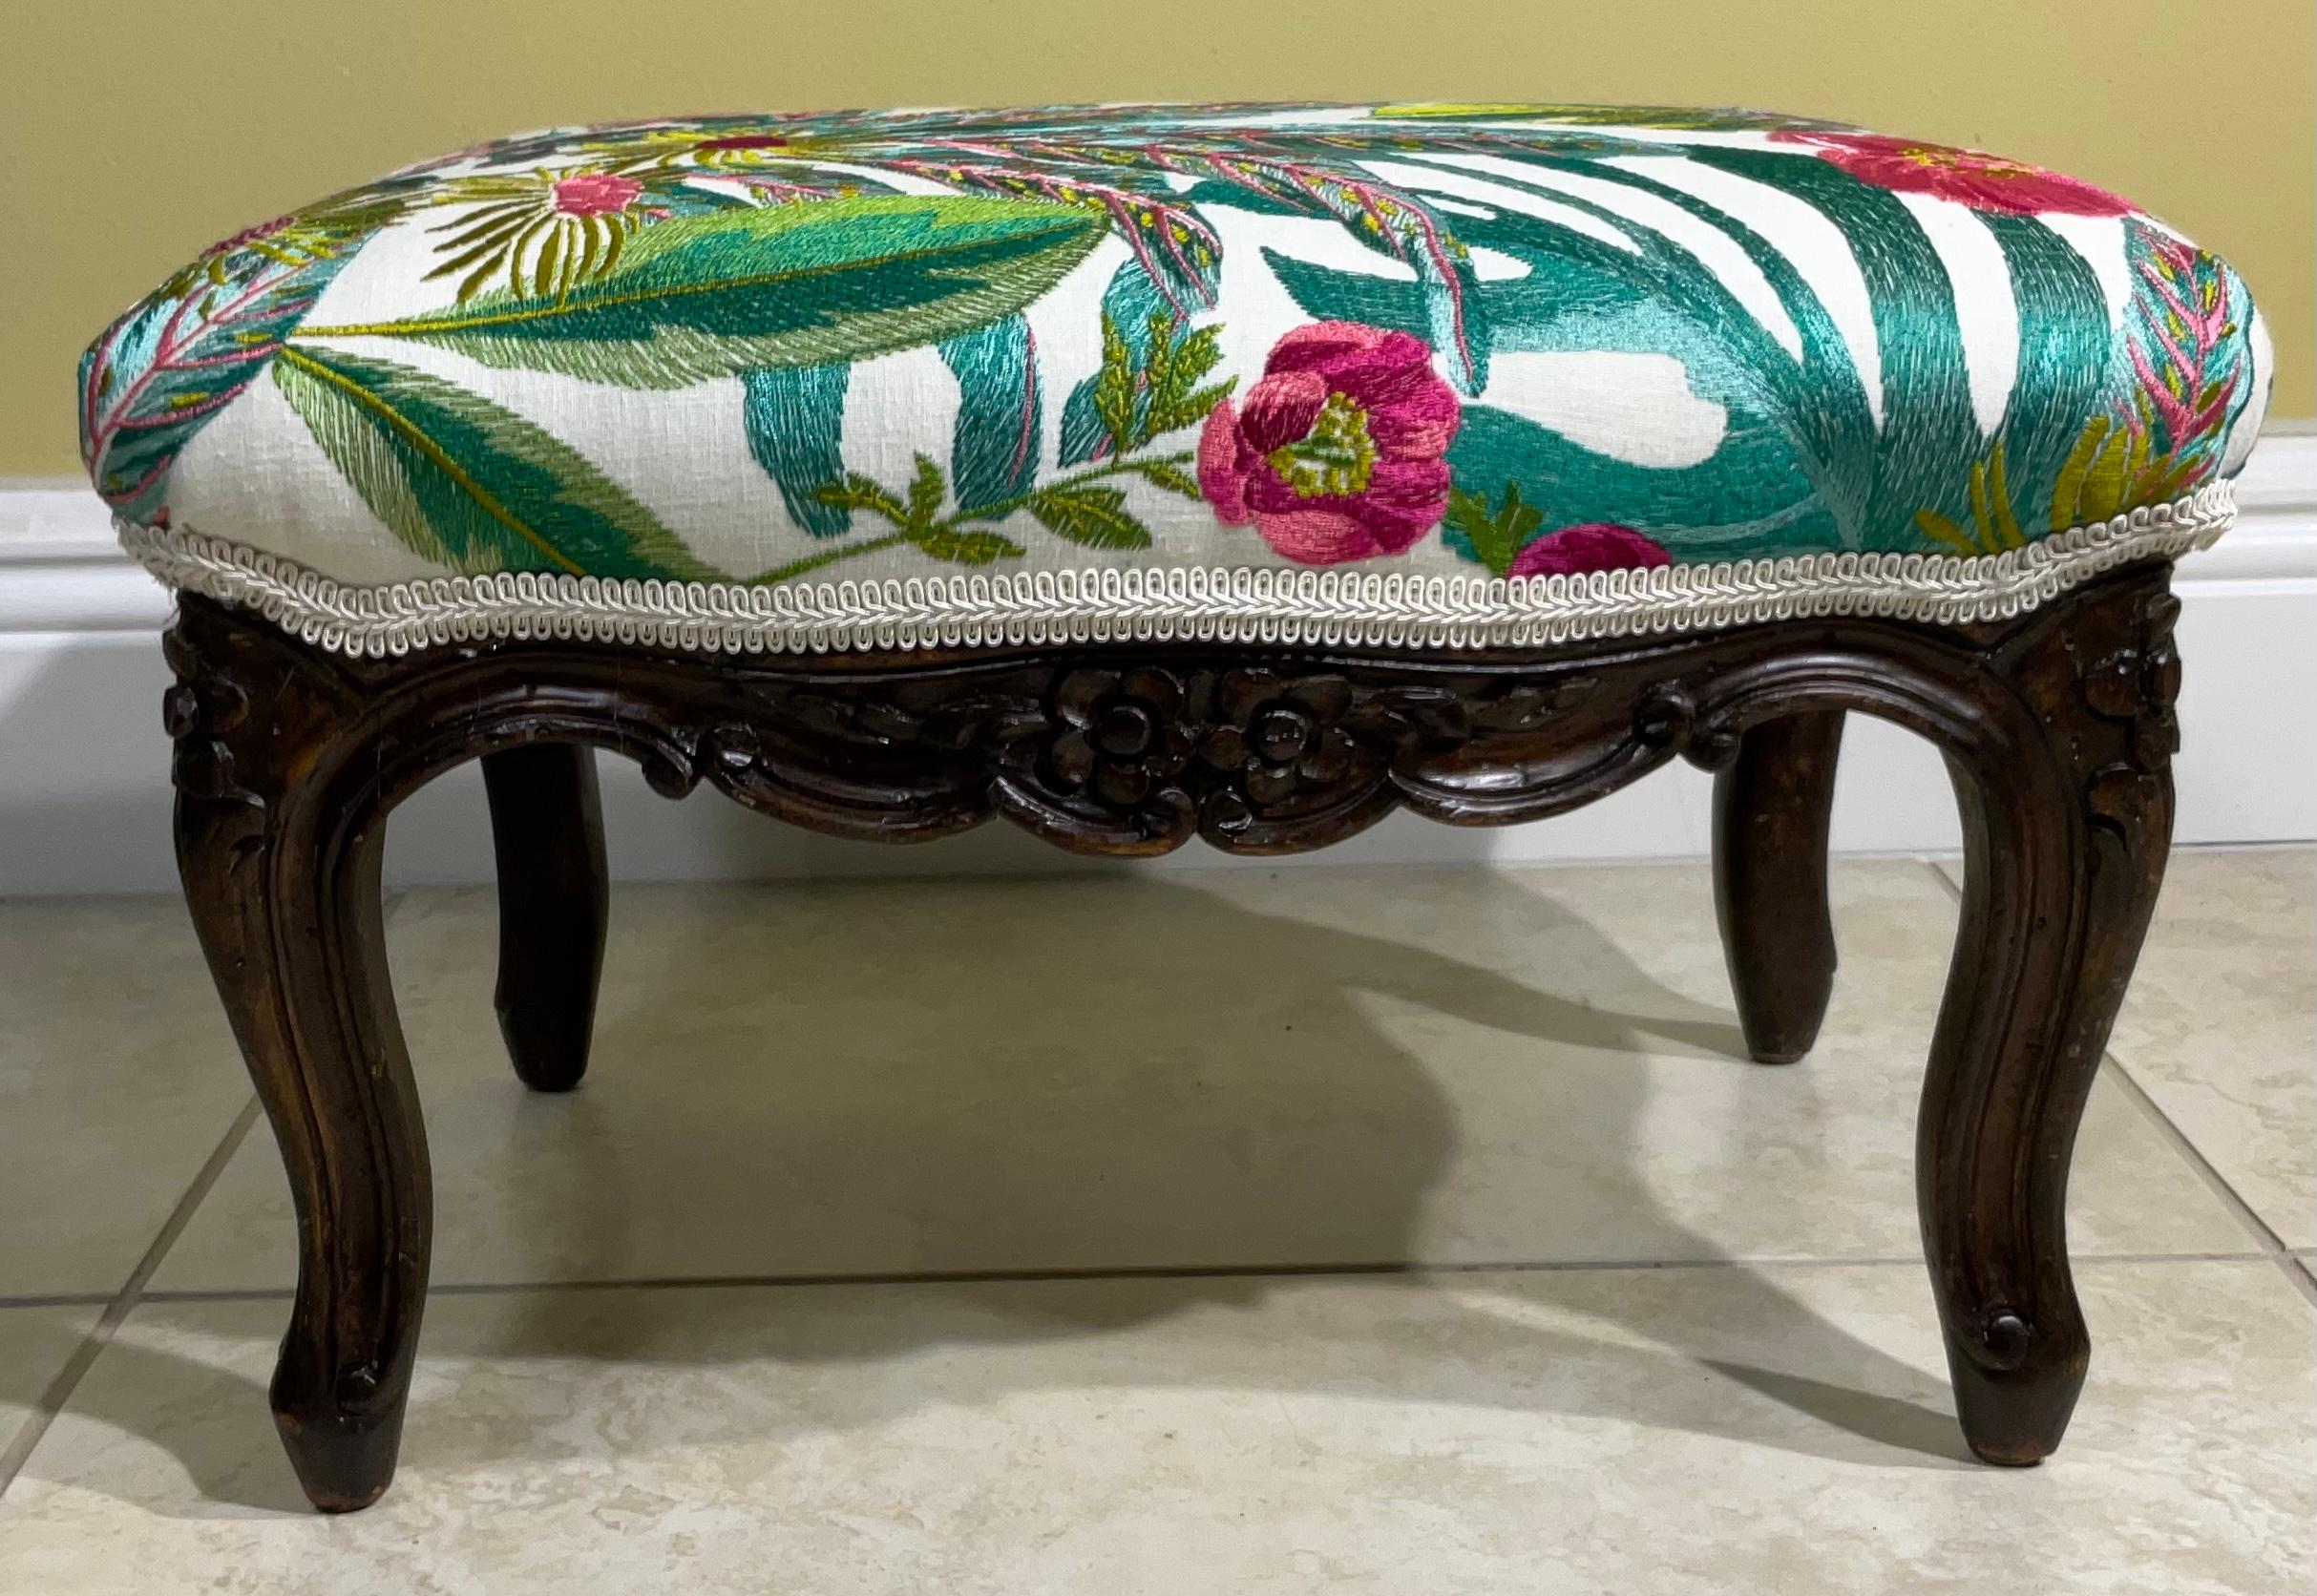 Funky antique hand carved foot stool newly upholster with beautiful quality cotton with exceptional embroidery Of vibrant Tropical motif.
Great fresh object of art for any room.